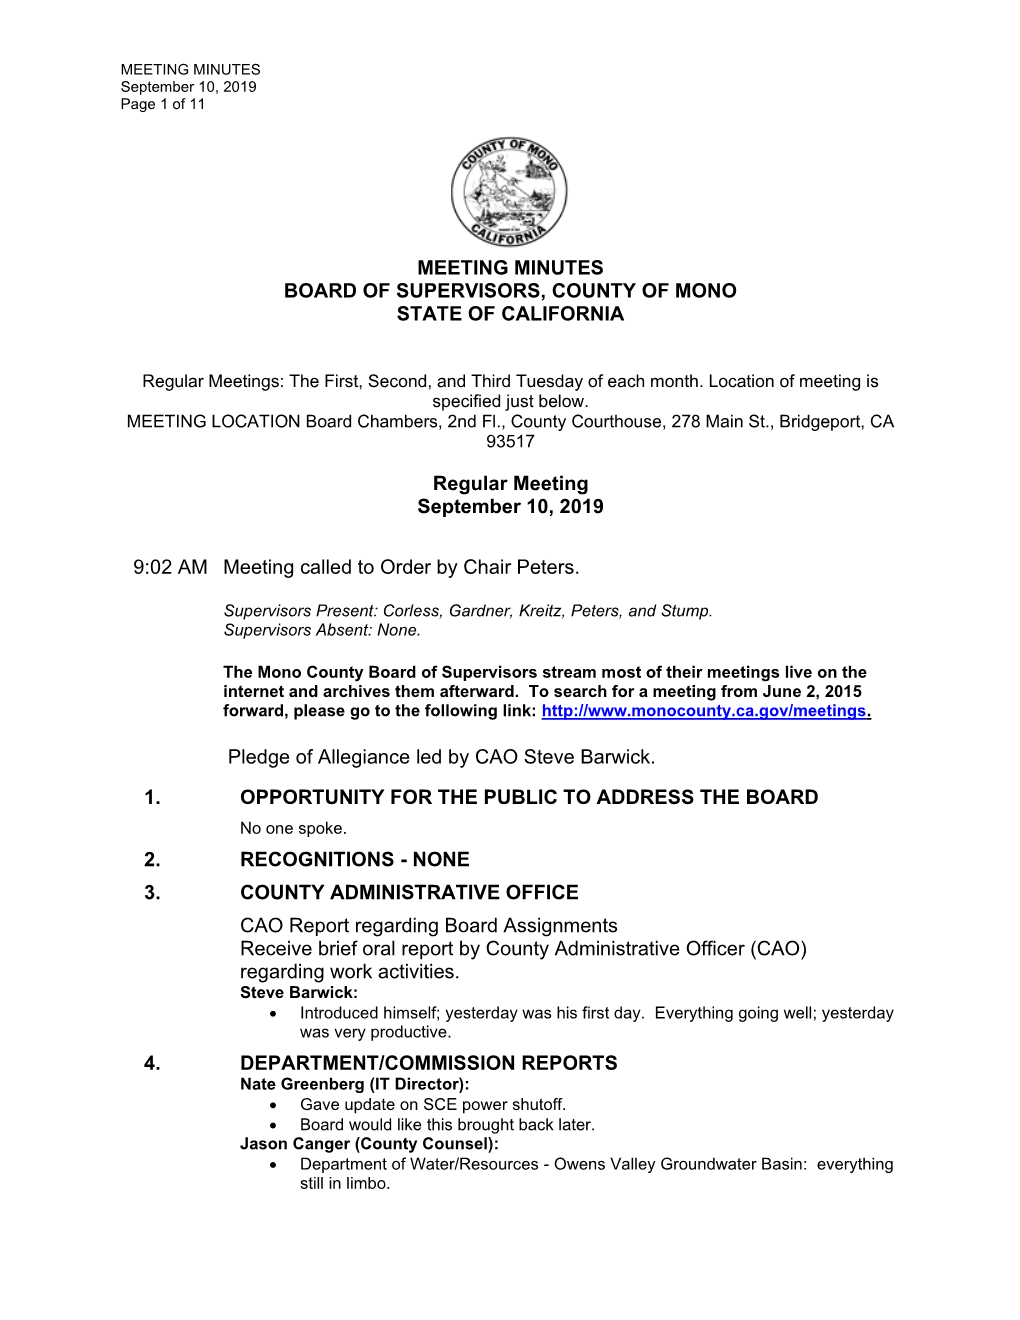 MEETING MINUTES BOARD of SUPERVISORS, COUNTY of MONO STATE of CALIFORNIA Regular Meeting September 10, 2019 9:02 AM Meeting Call